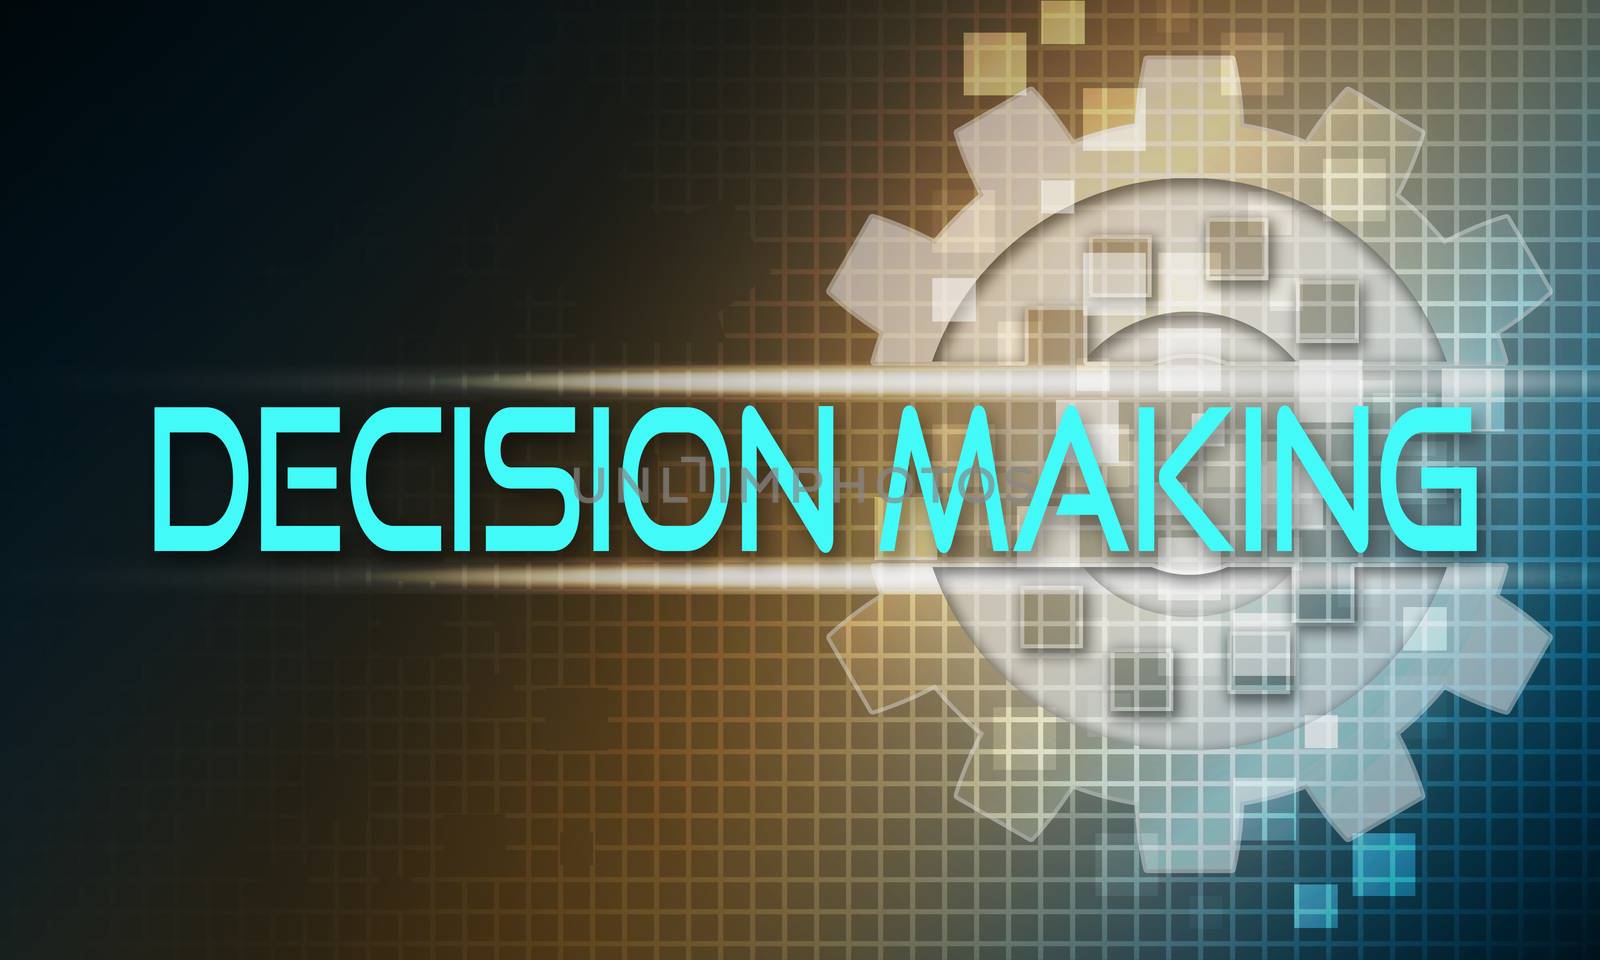 Decision making concept text on the mechanism of gears. Technology background, 3d rendering.